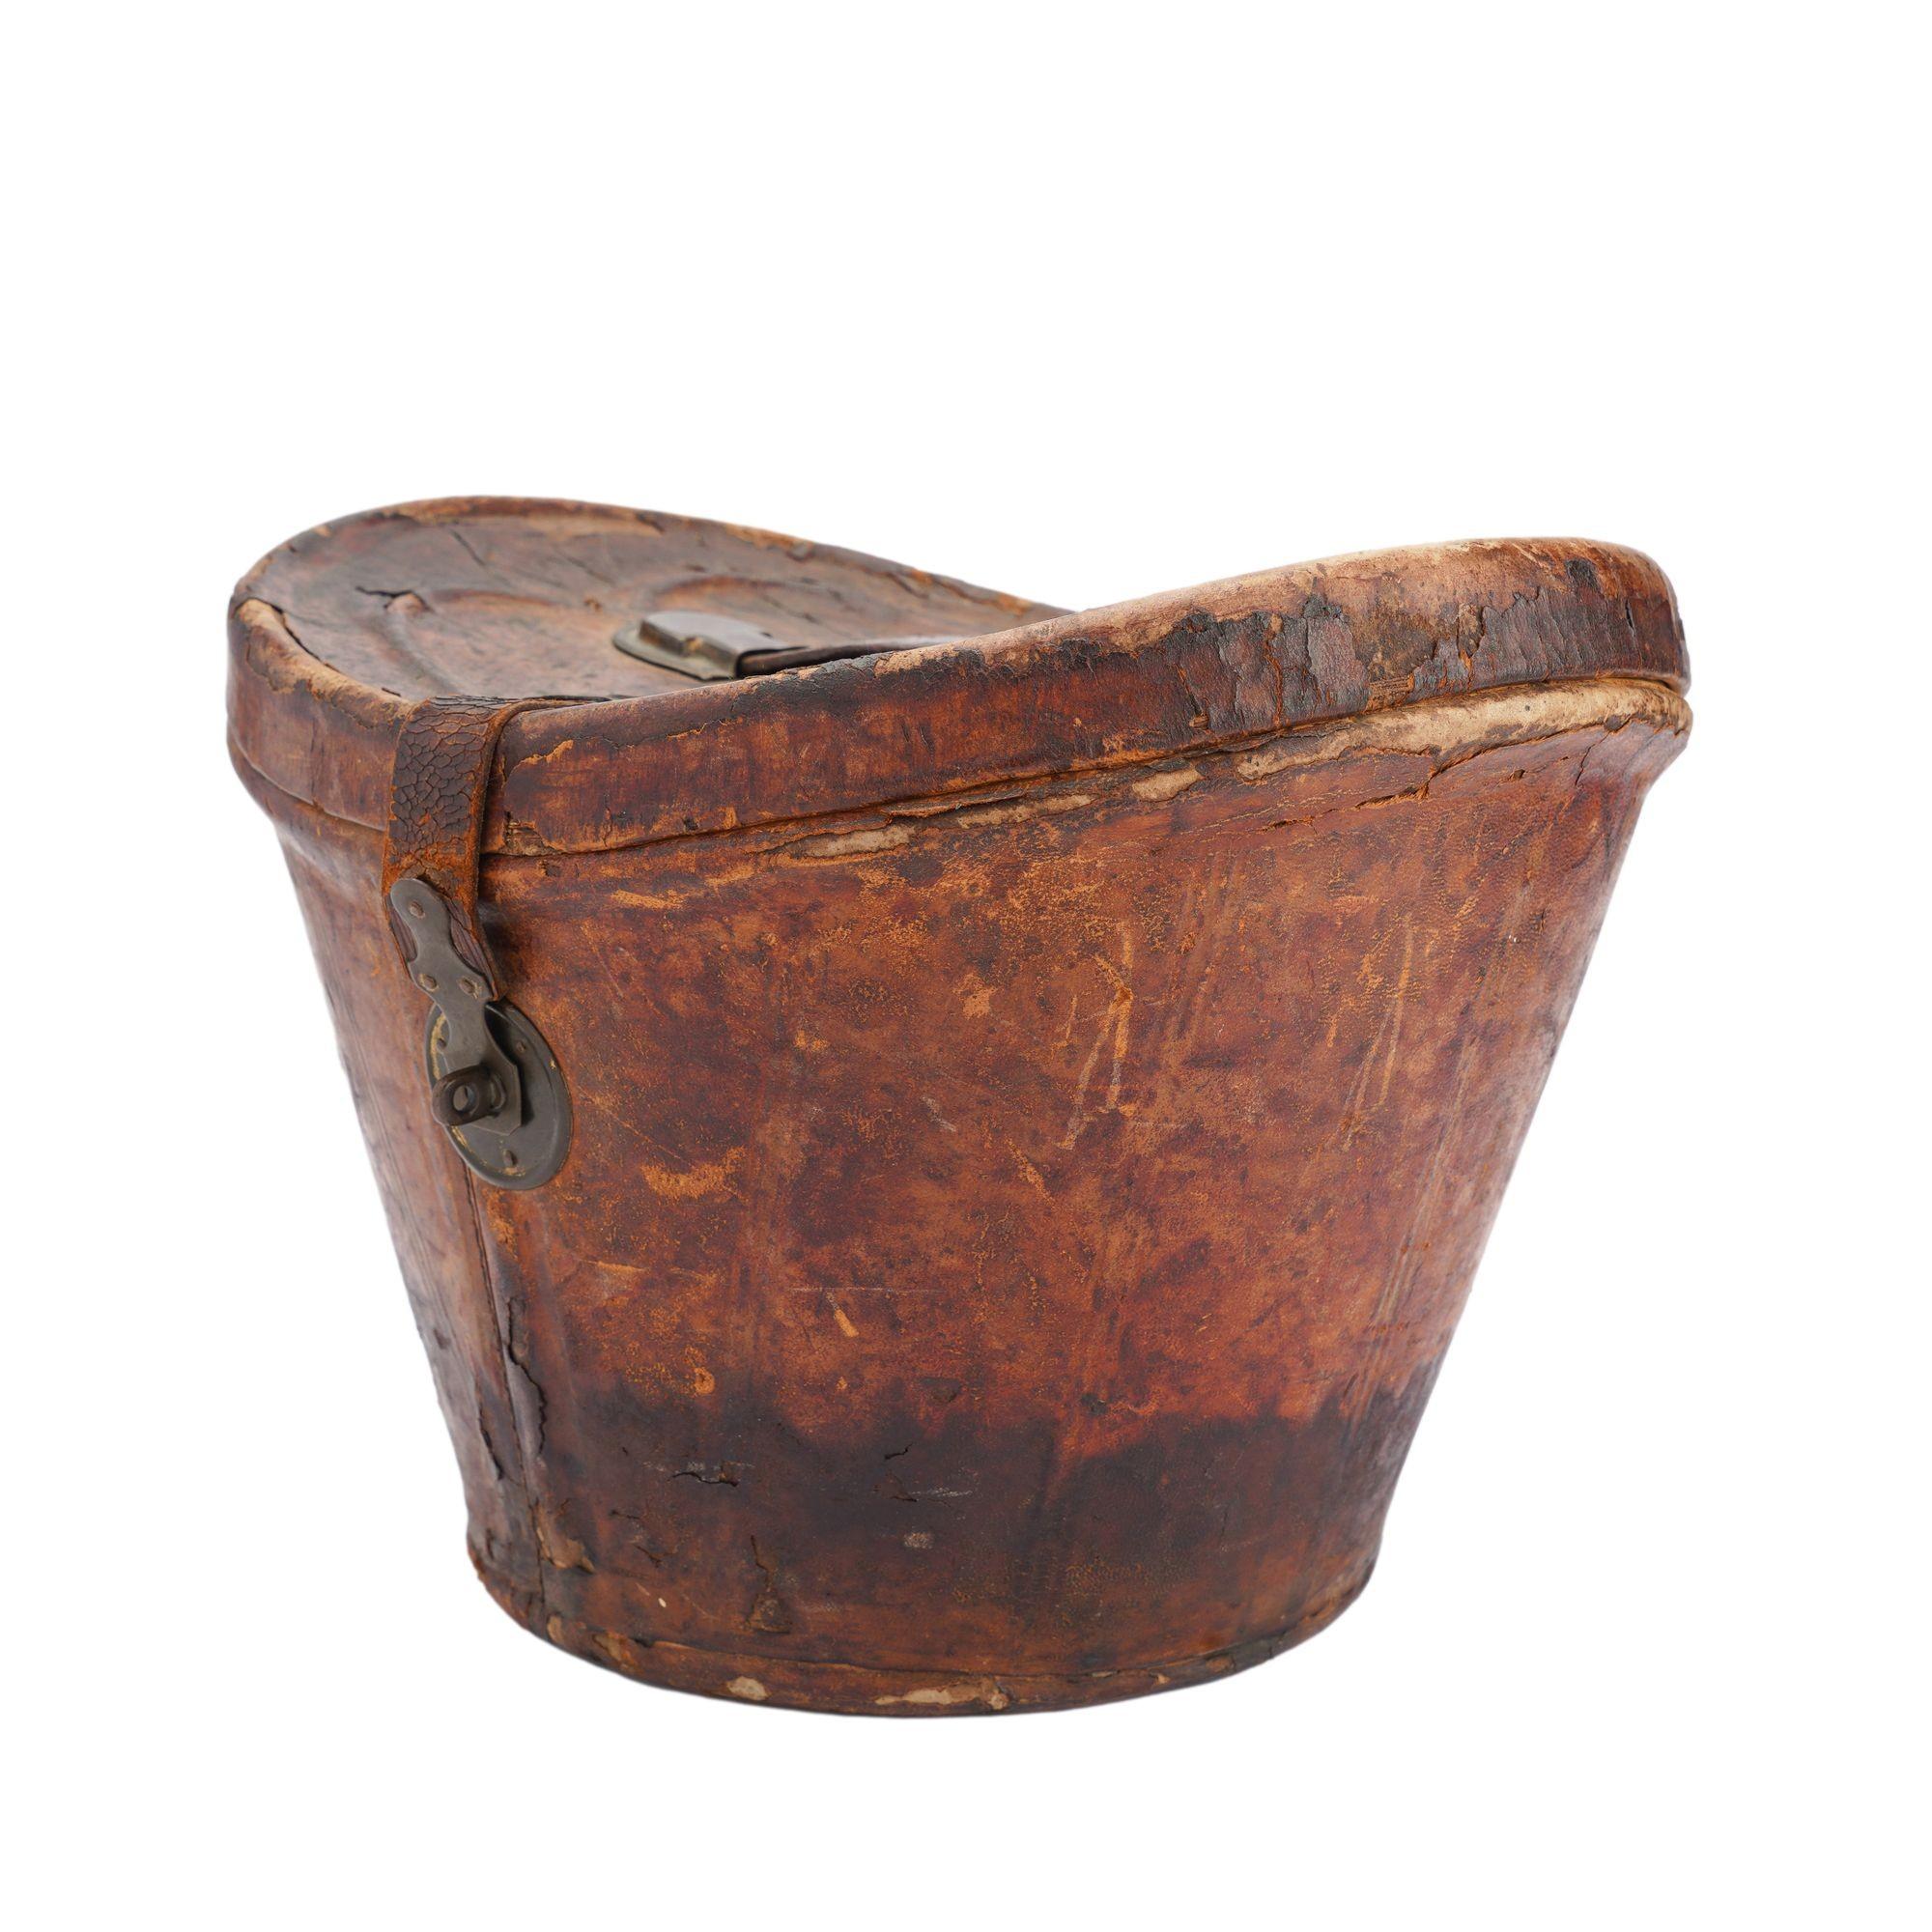 Distressed leather hat box for a man’s wide brim top hat. The lid is hinged and has a metal closure. The handle and strap stays are molded metal. The interior retains its original cream and green patterned paper lining.
England, circa